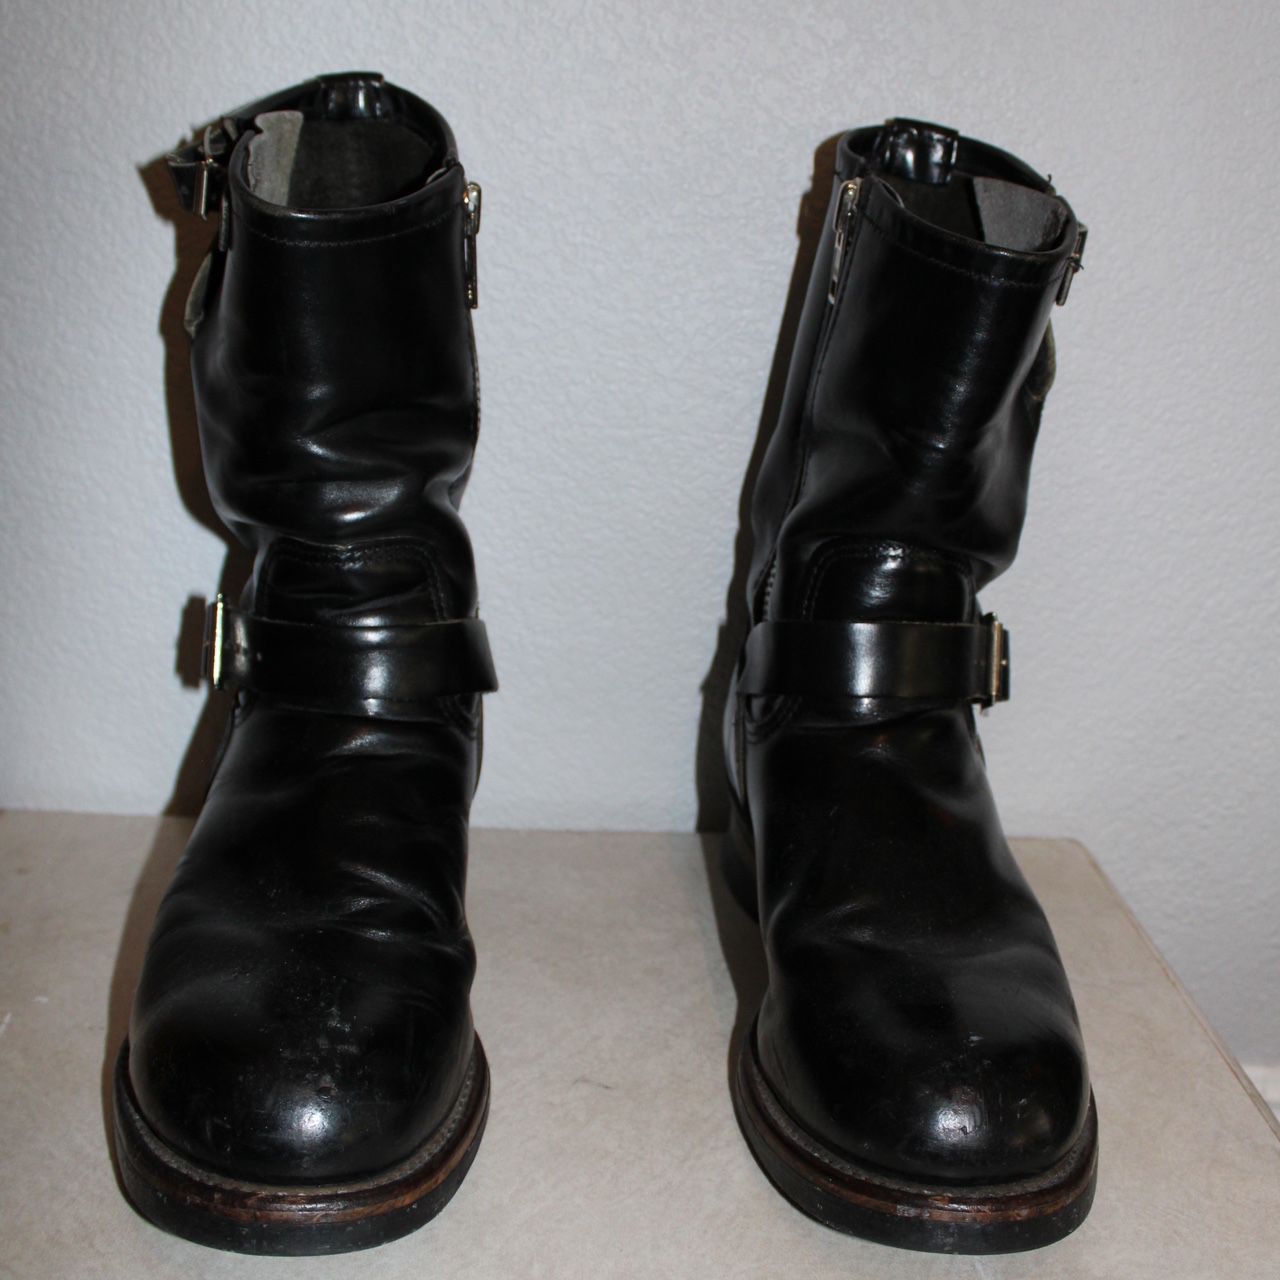 Red Wing Engineer/Motorcycle Boots  Used But NICE 9.5D